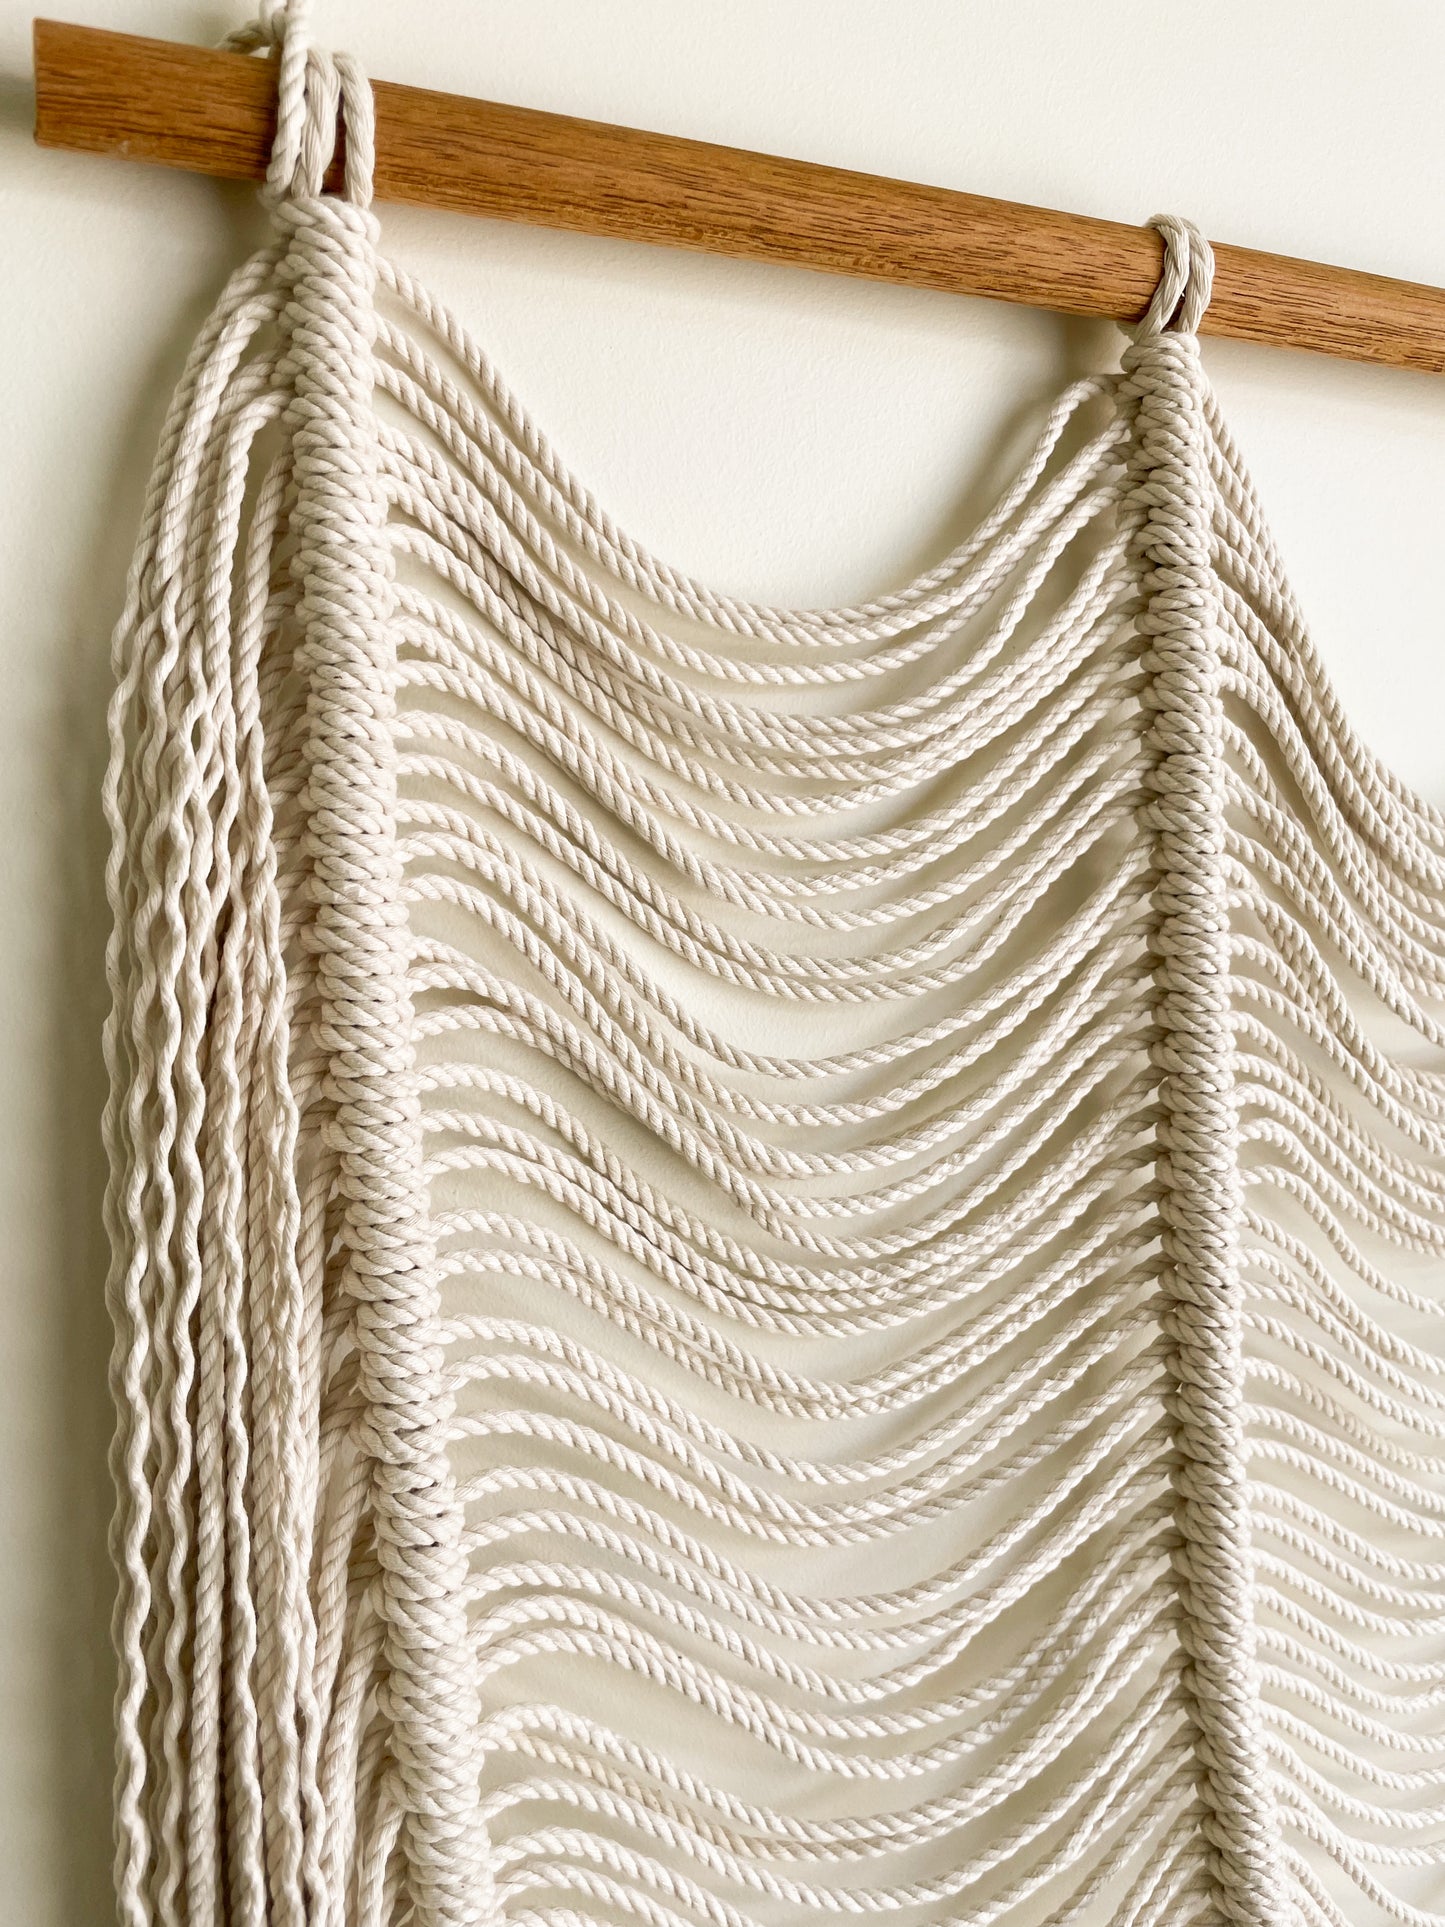 Closeup view of a modern macrame wall hanging hanged on a wall